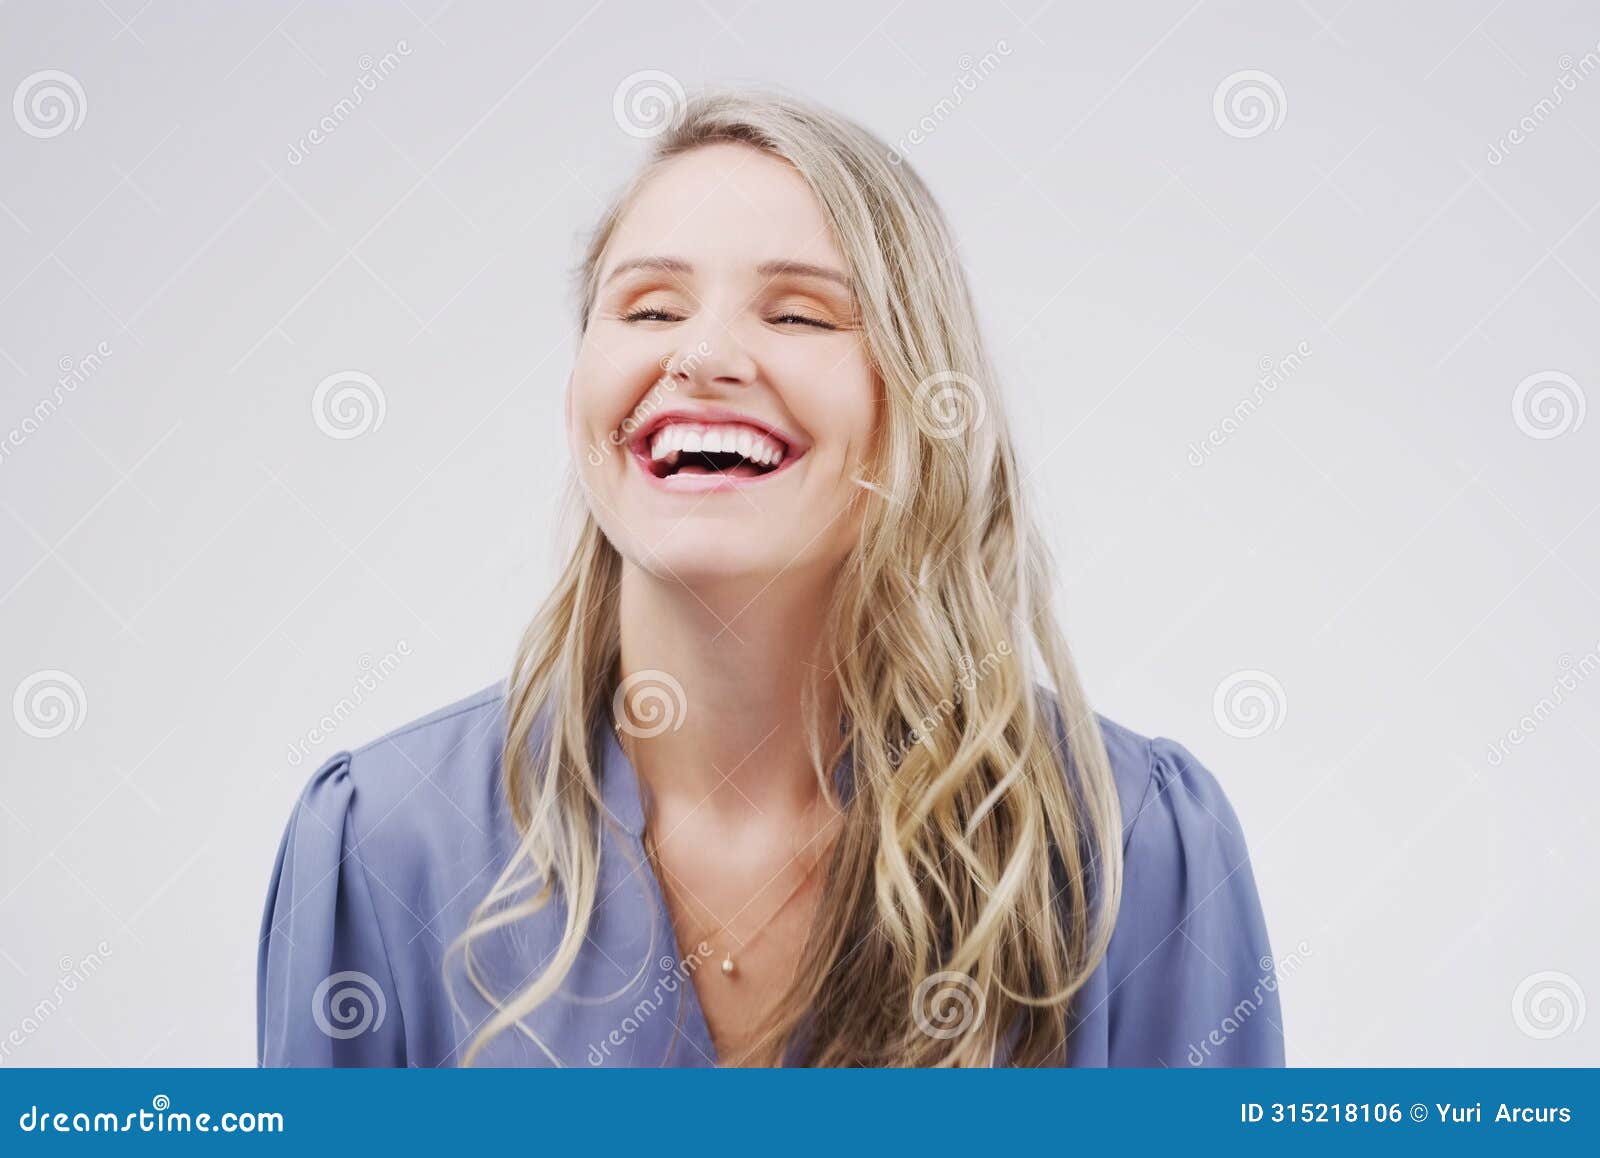 smile, happy and woman with laughing in studio for funny joke, playful comic and positive humour. female person